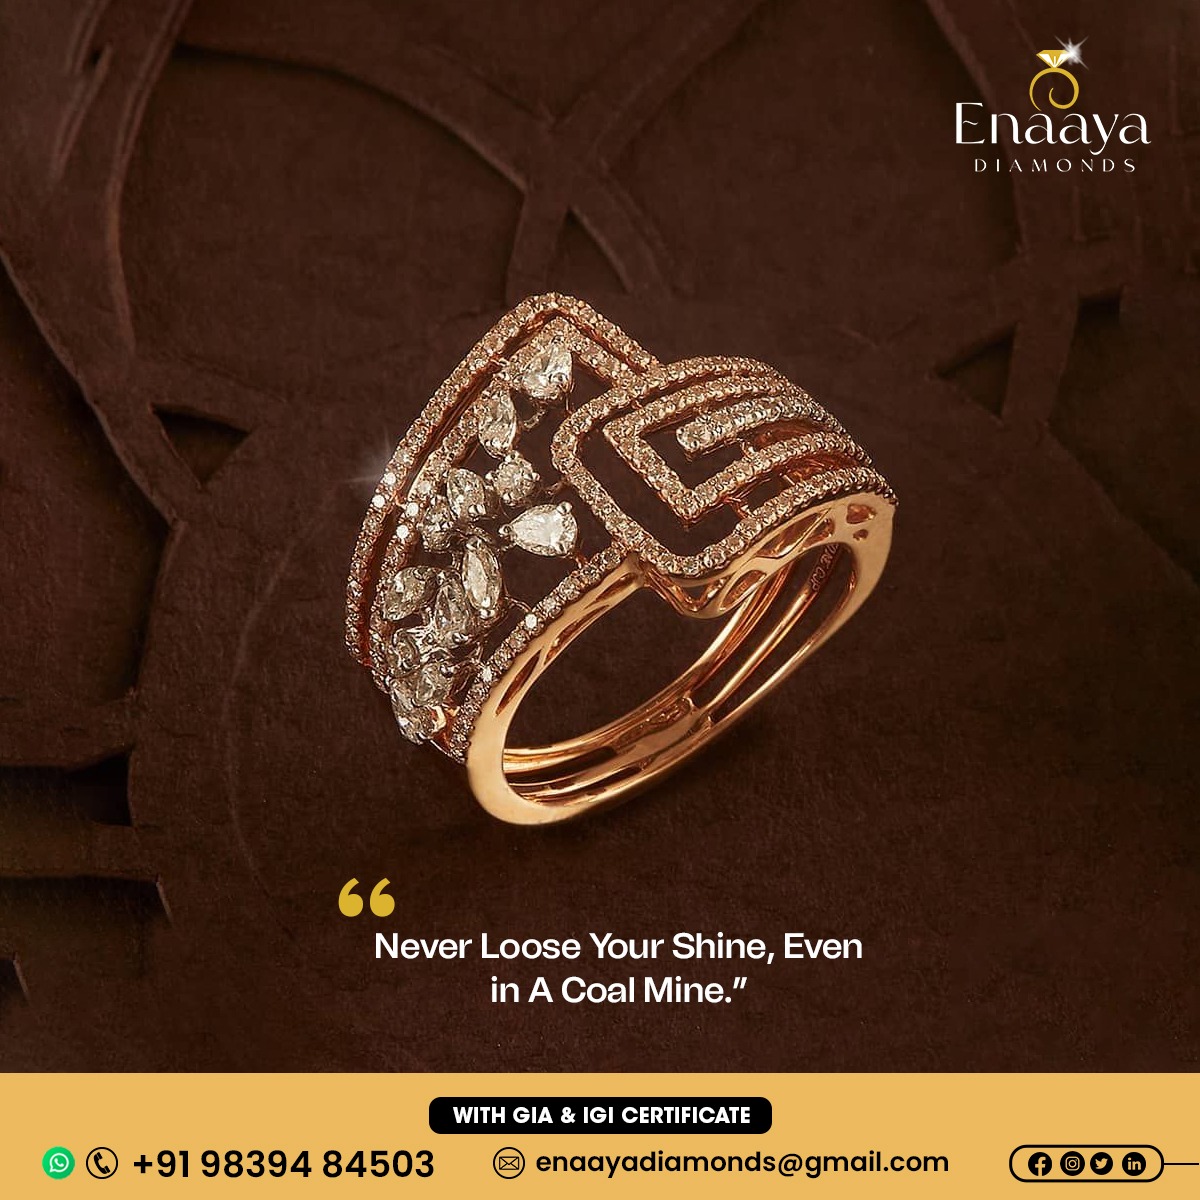 Speak your heart out with this stunning diamond studded bangle which stands as an epitome of elegance and class!
Experience Newness with our stunning collection of diamond jewellery.

WhatsApp us for more details:- +91 9839484503
.
#bangles #bangleset #banglelove #banglebracelet